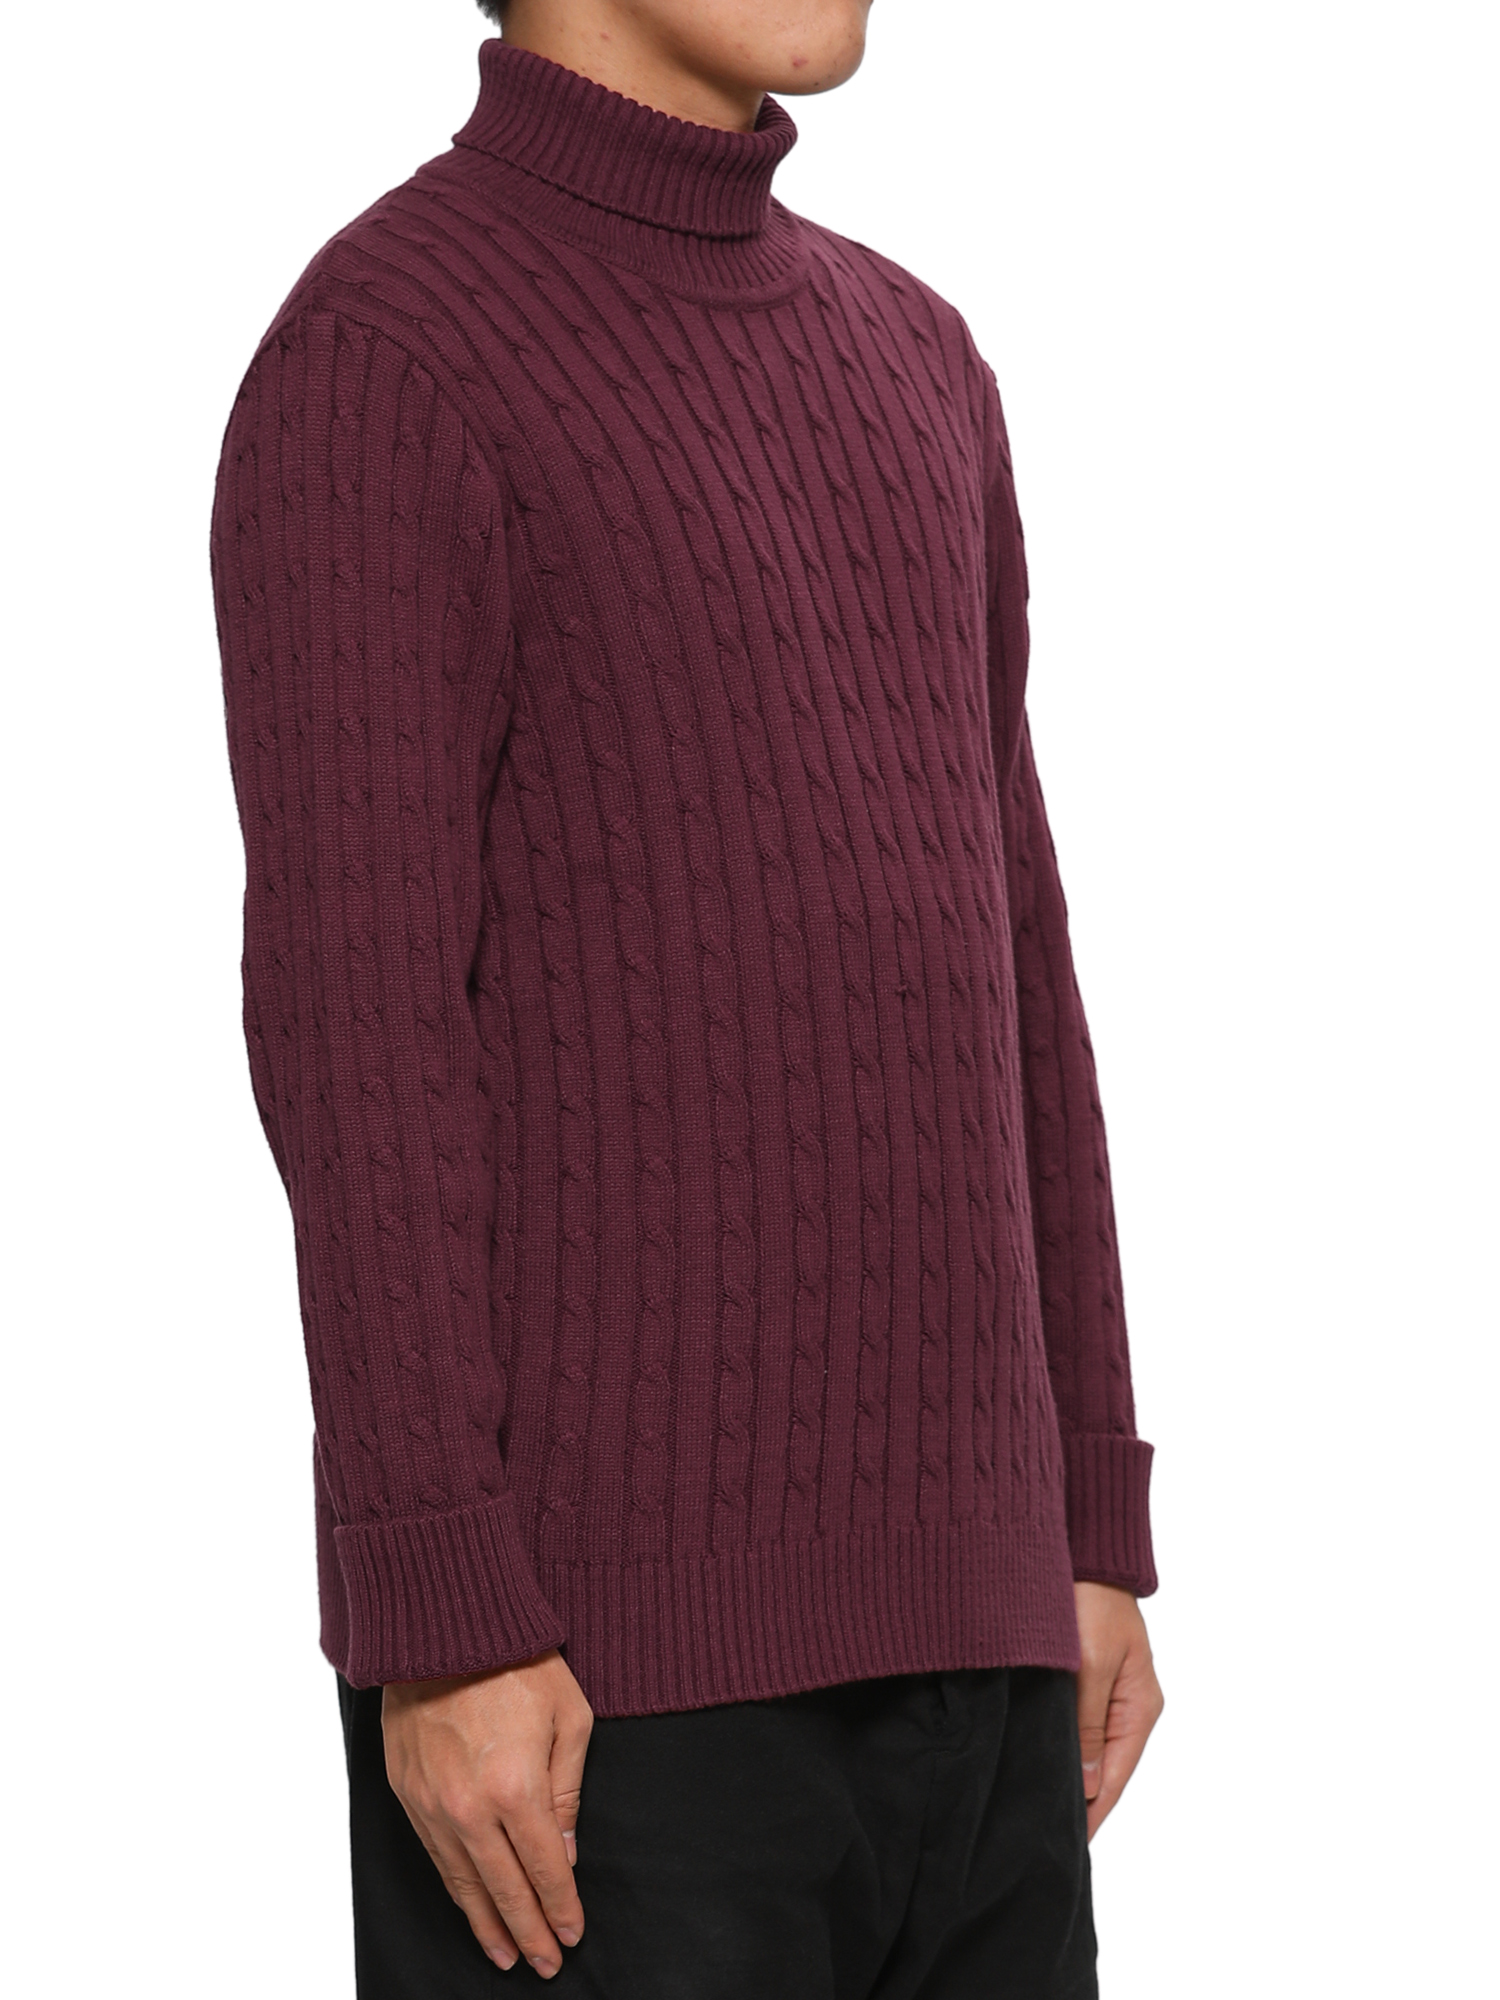 Unique Bargains Men's Turtleneck Long Sleeves Pullover Cable Knit Sweater - image 4 of 4